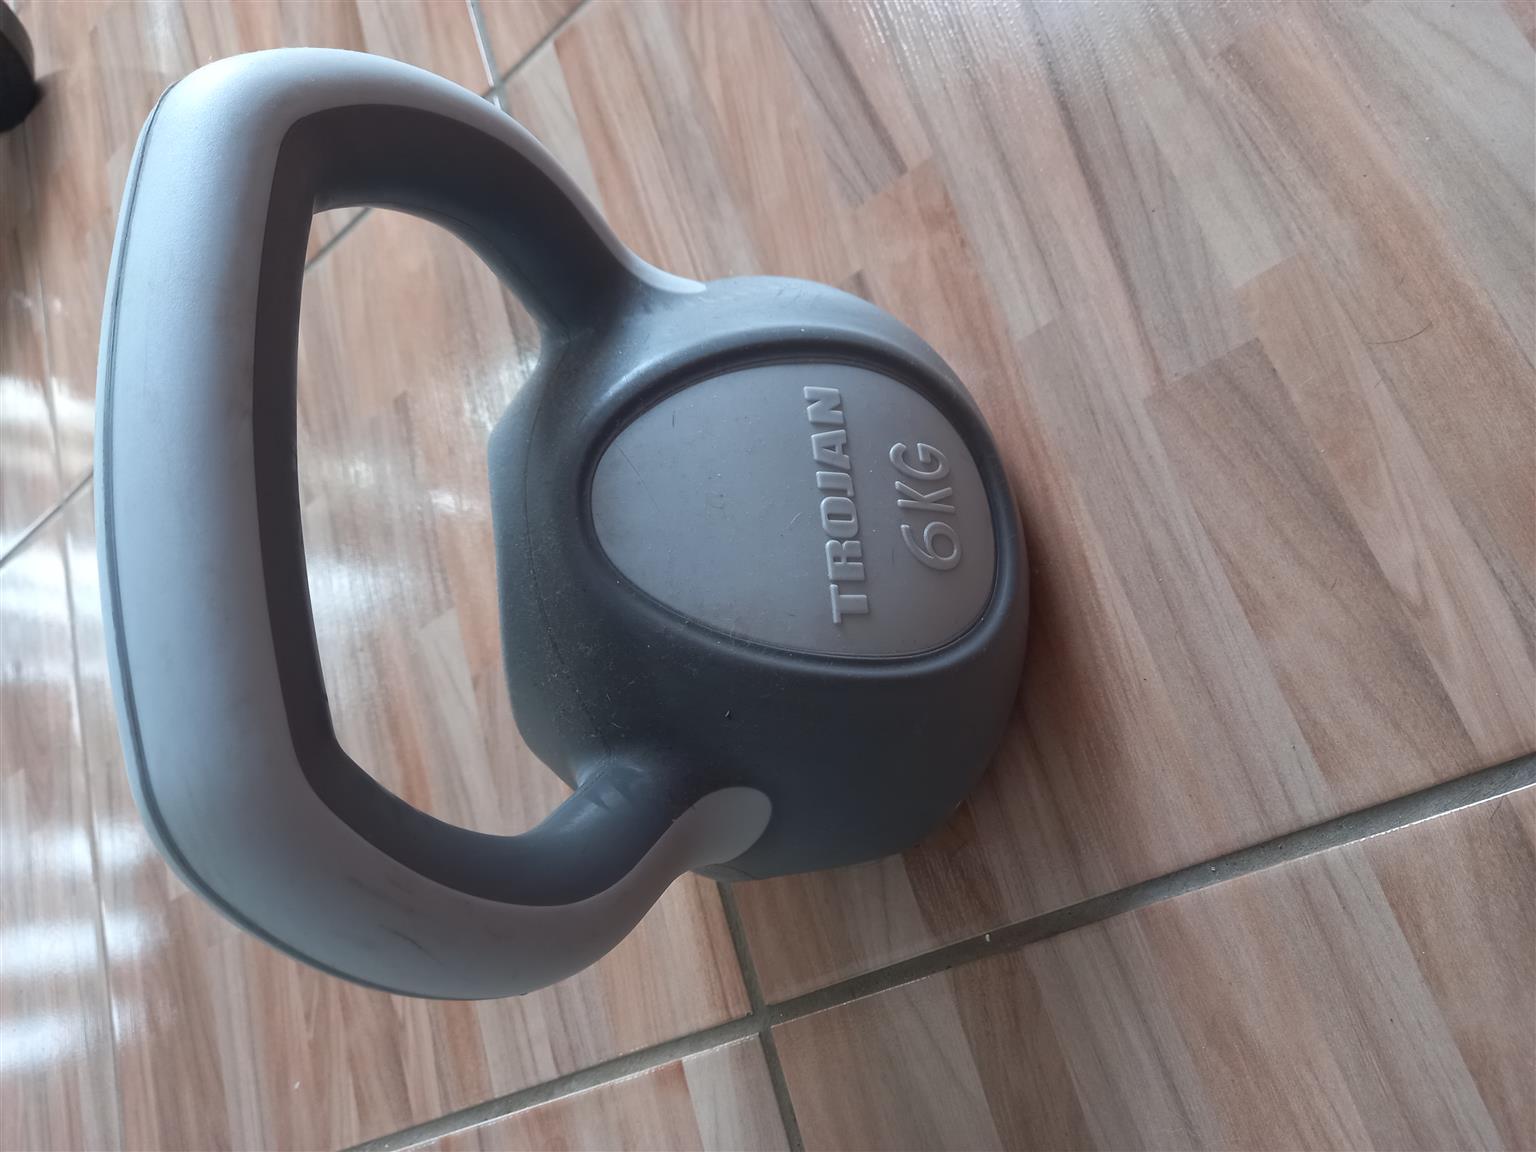 Gym weights, barbell, kettlebell, dumbells and ankle weights